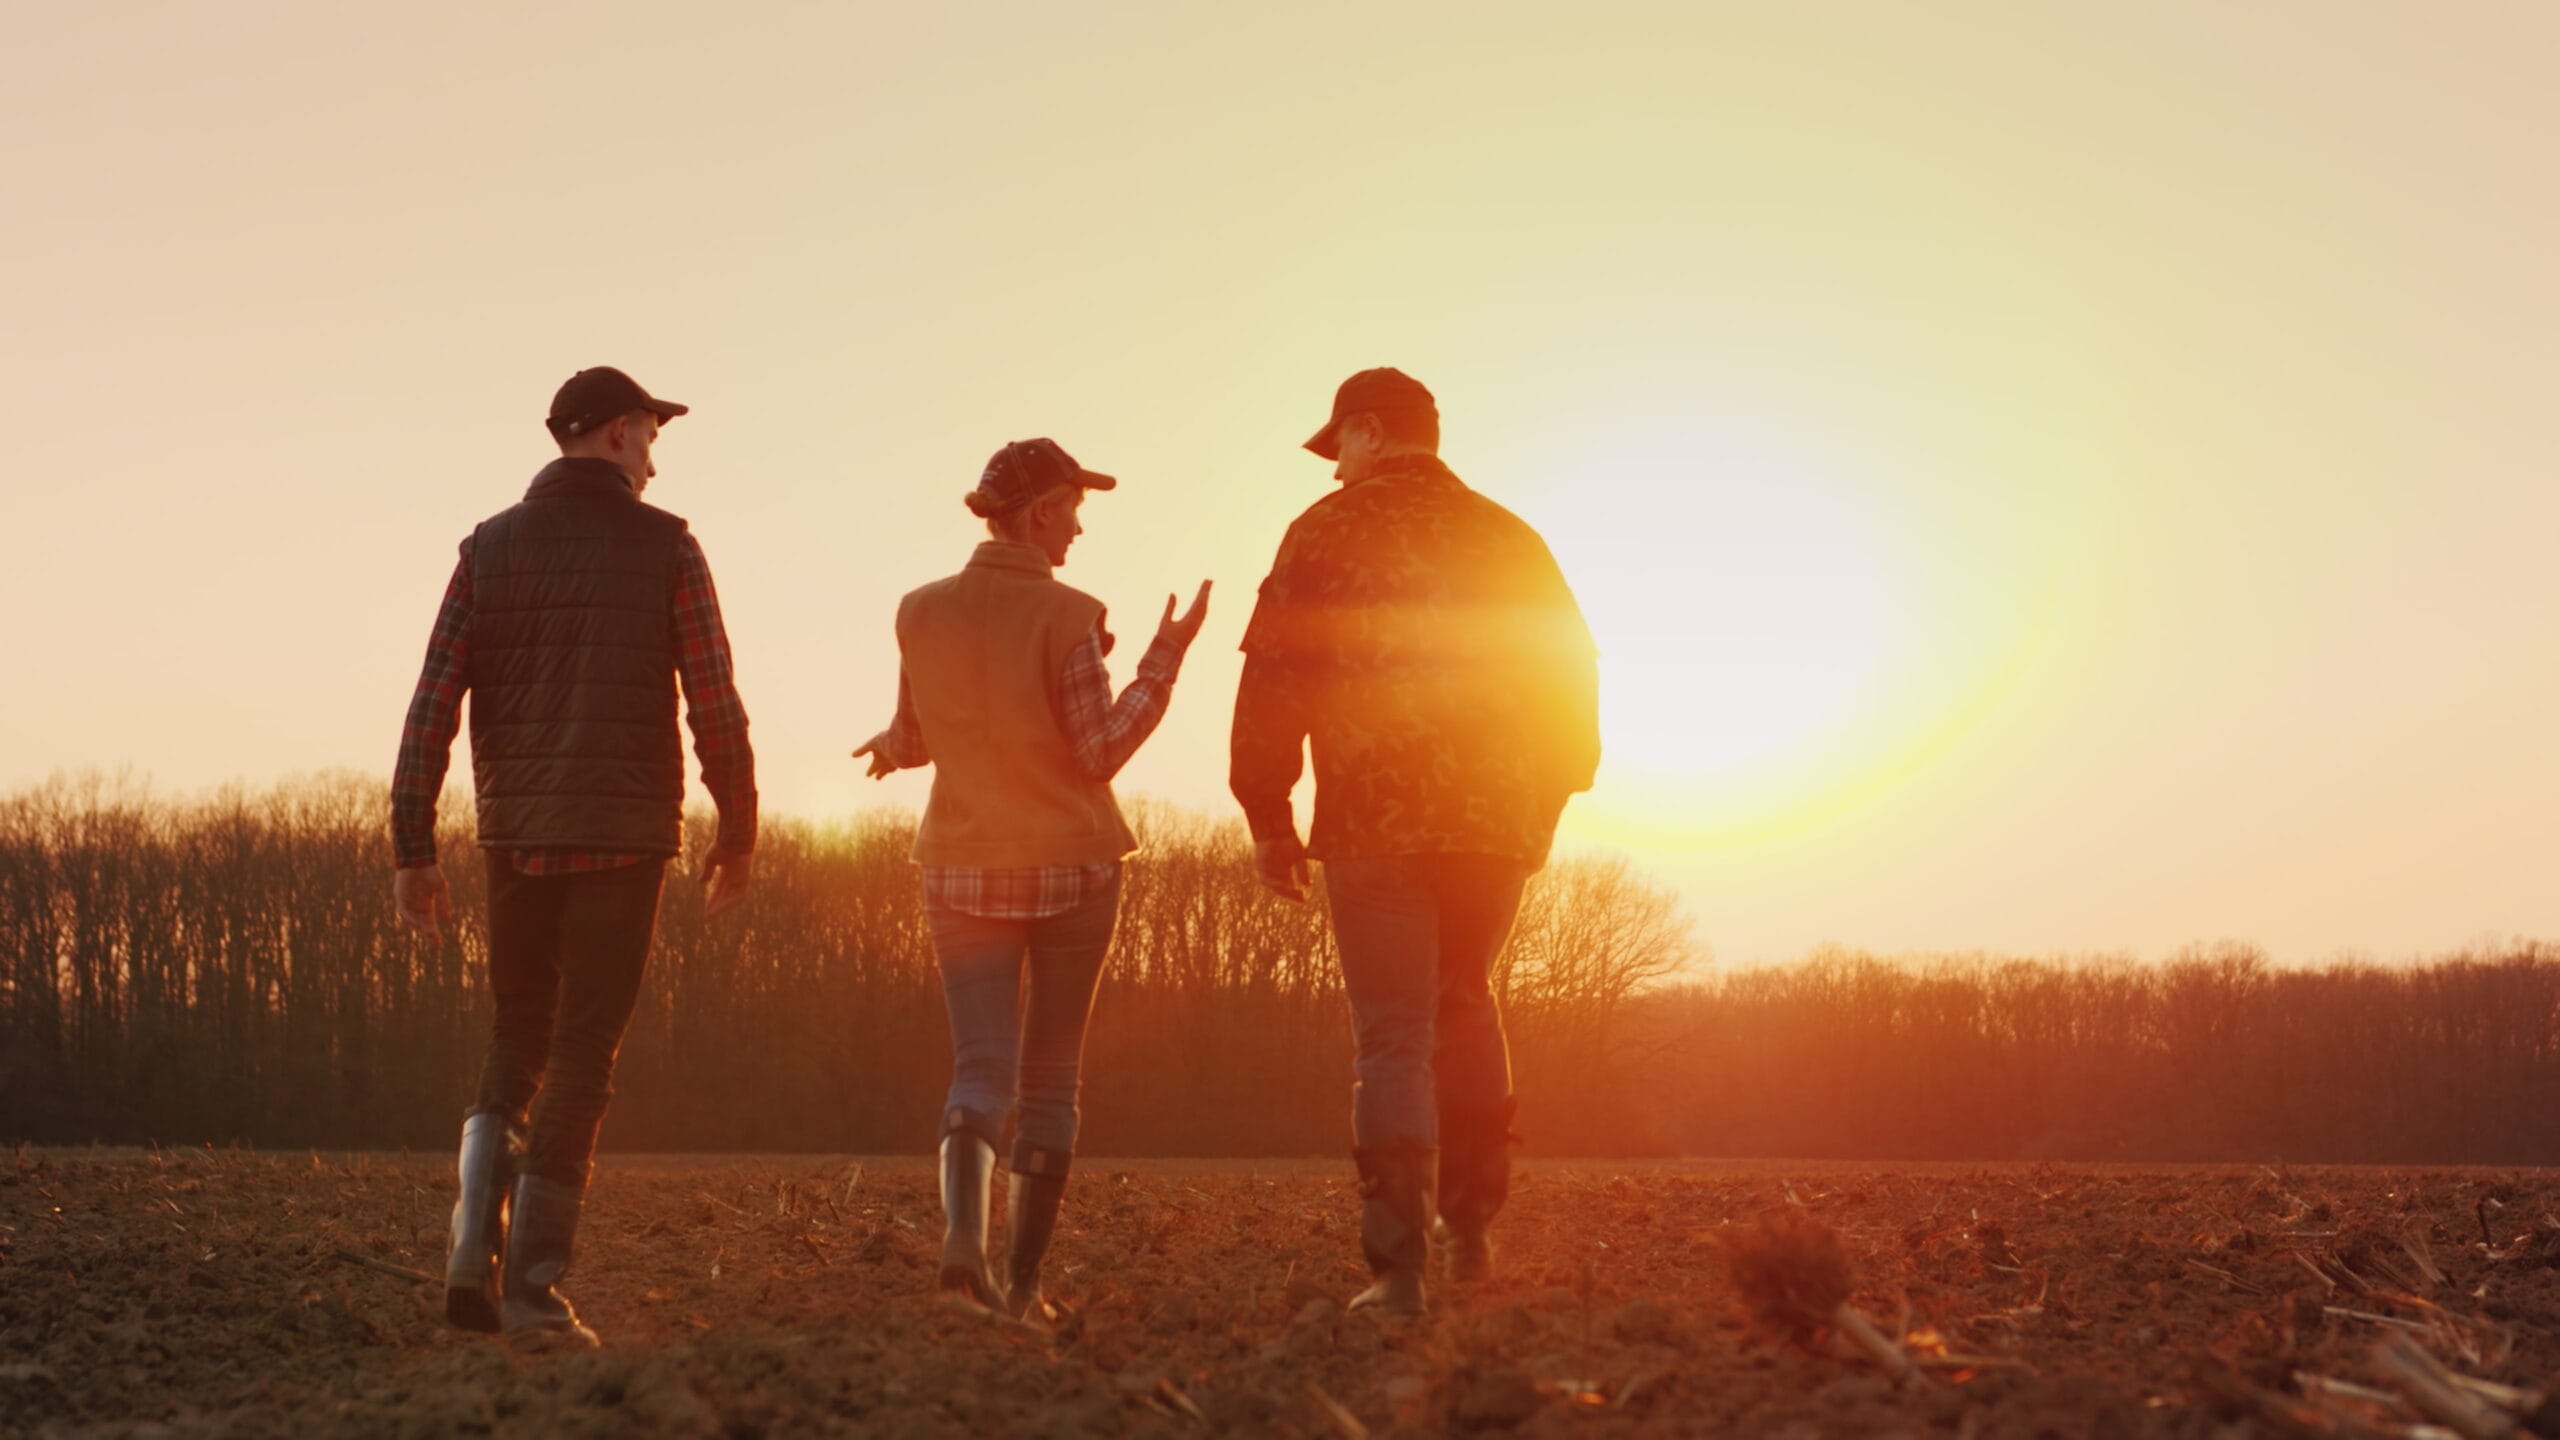 Three farmers go ahead on a plowed field at sunset. Young team of farmers